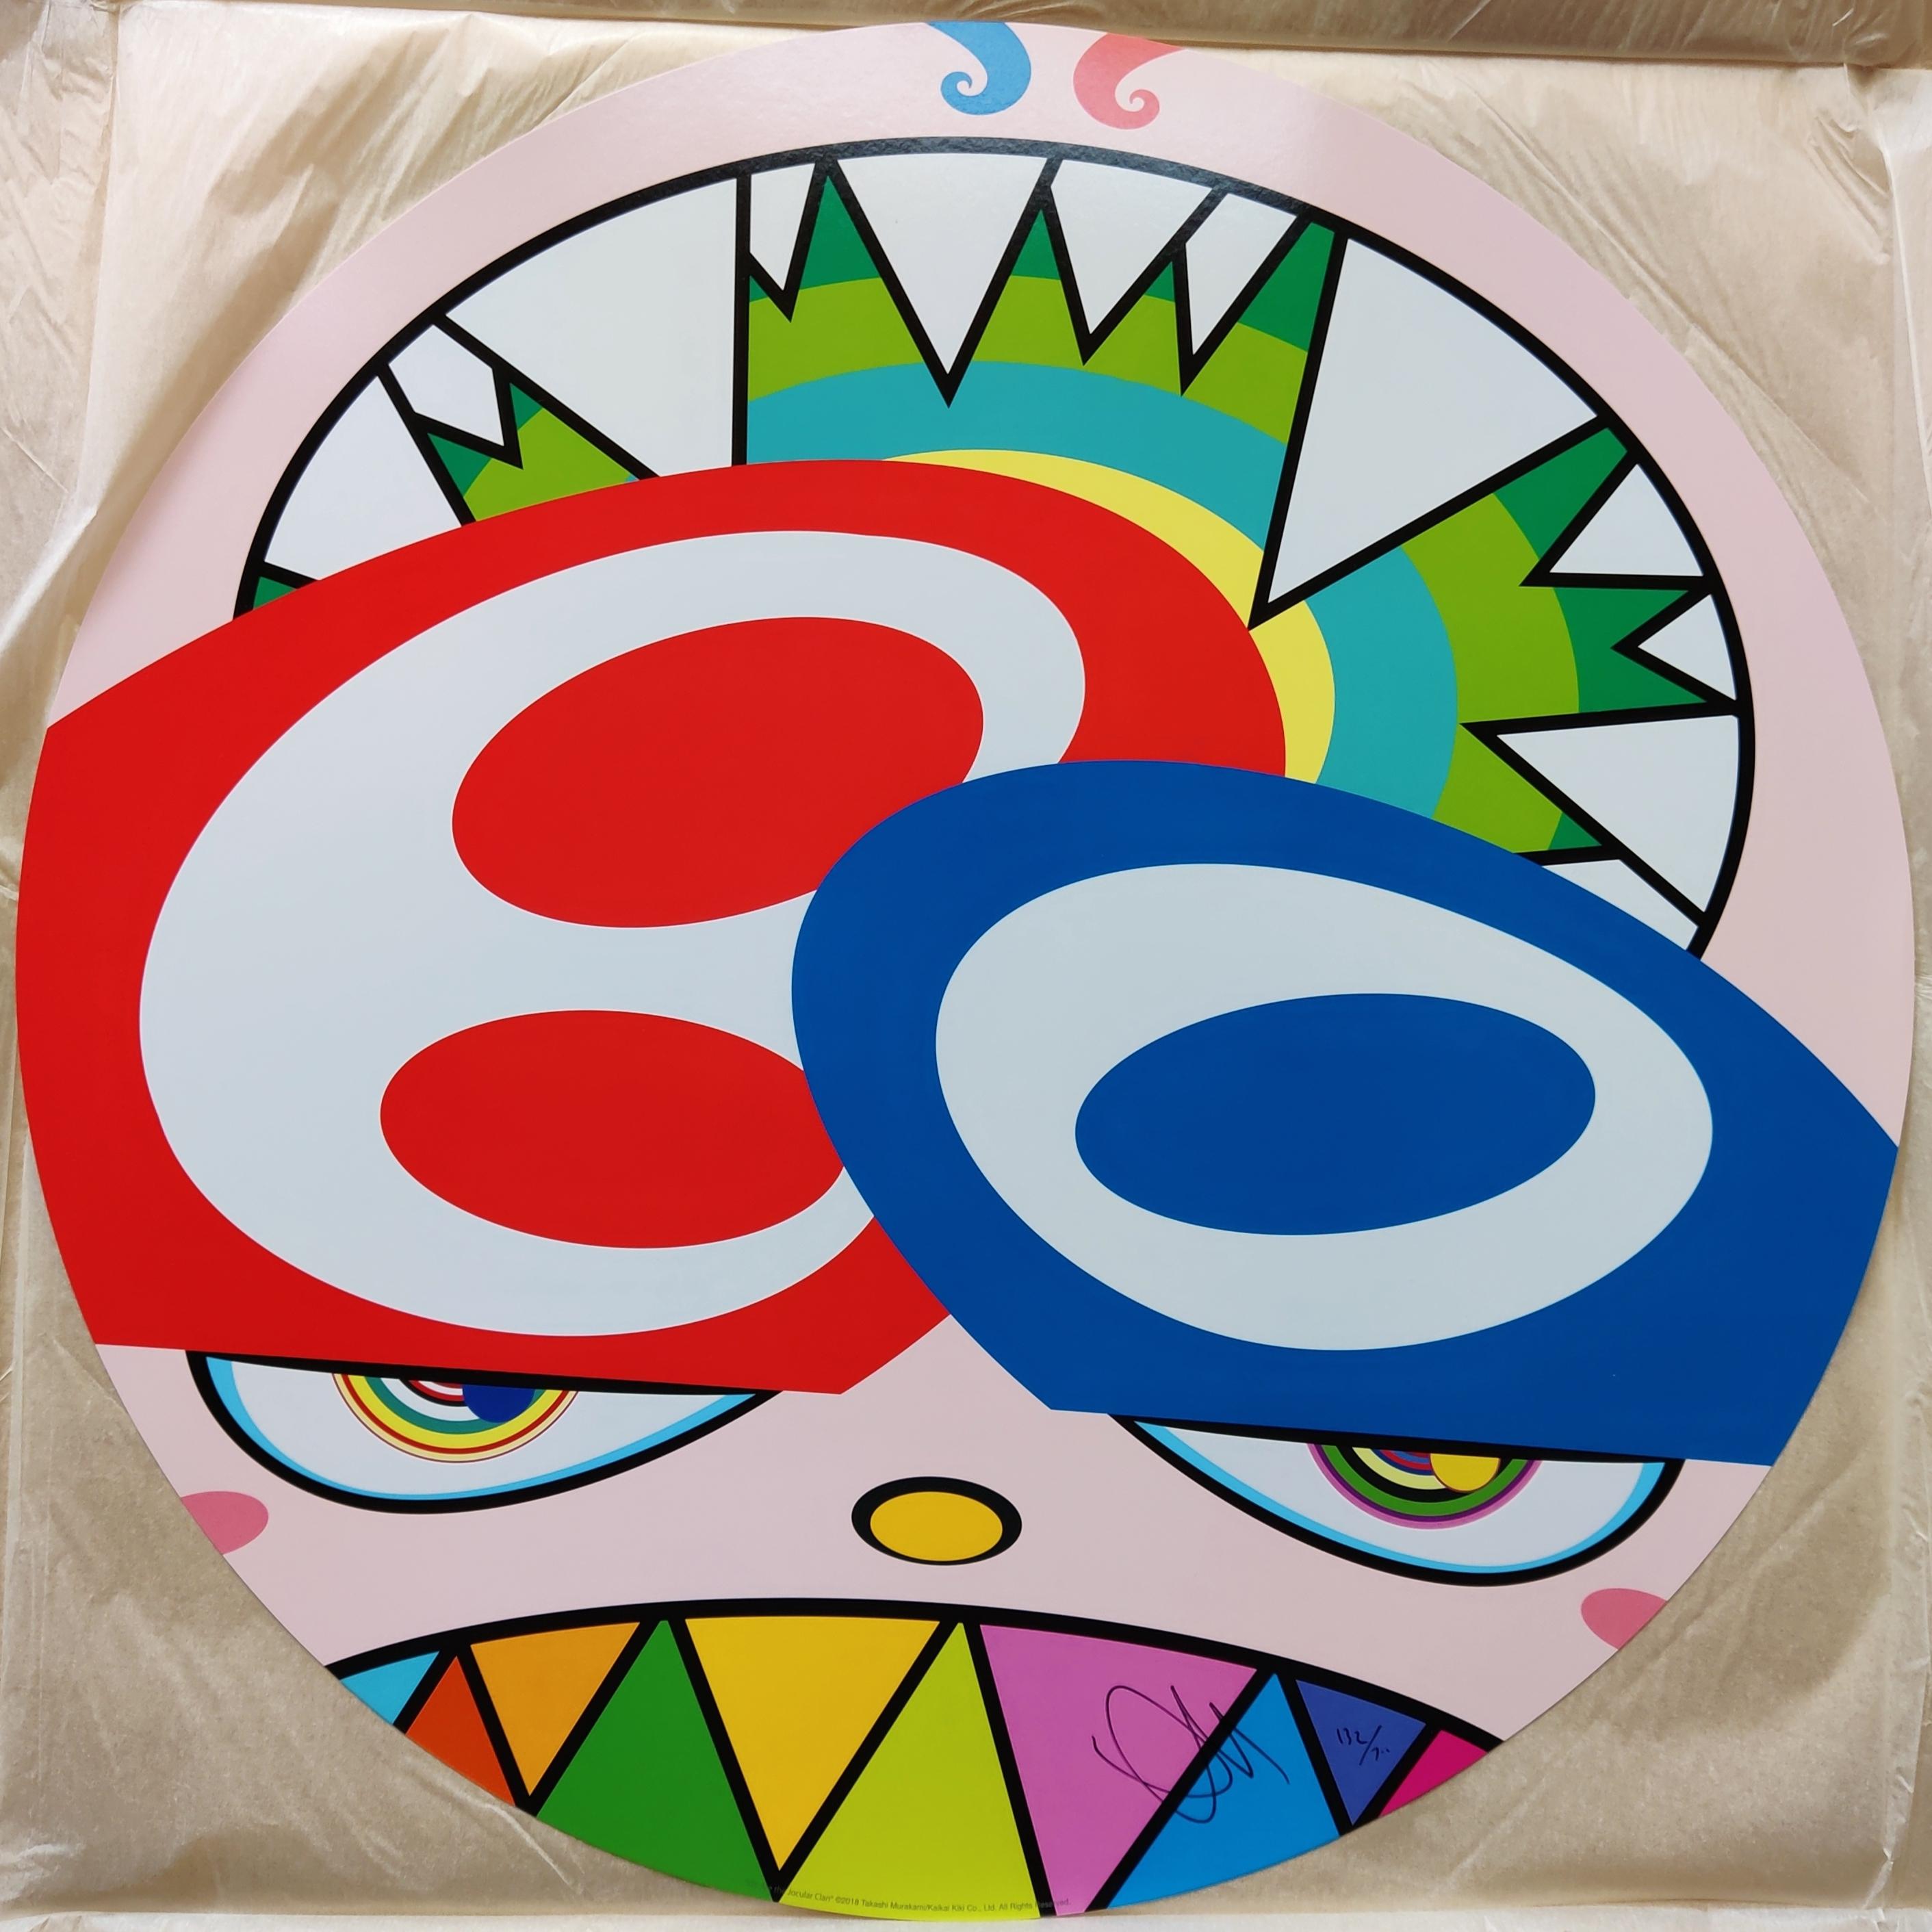 Takashi Murakami
We are the Square Jocular Clan (1), 2018
Offset lithograph
Edition: 132/300
Diameter: 50 cm
Hand Signed & Numbered by Takashi Murakami
The artwork is in excellent condition, including the original pack
Framing is an option and it